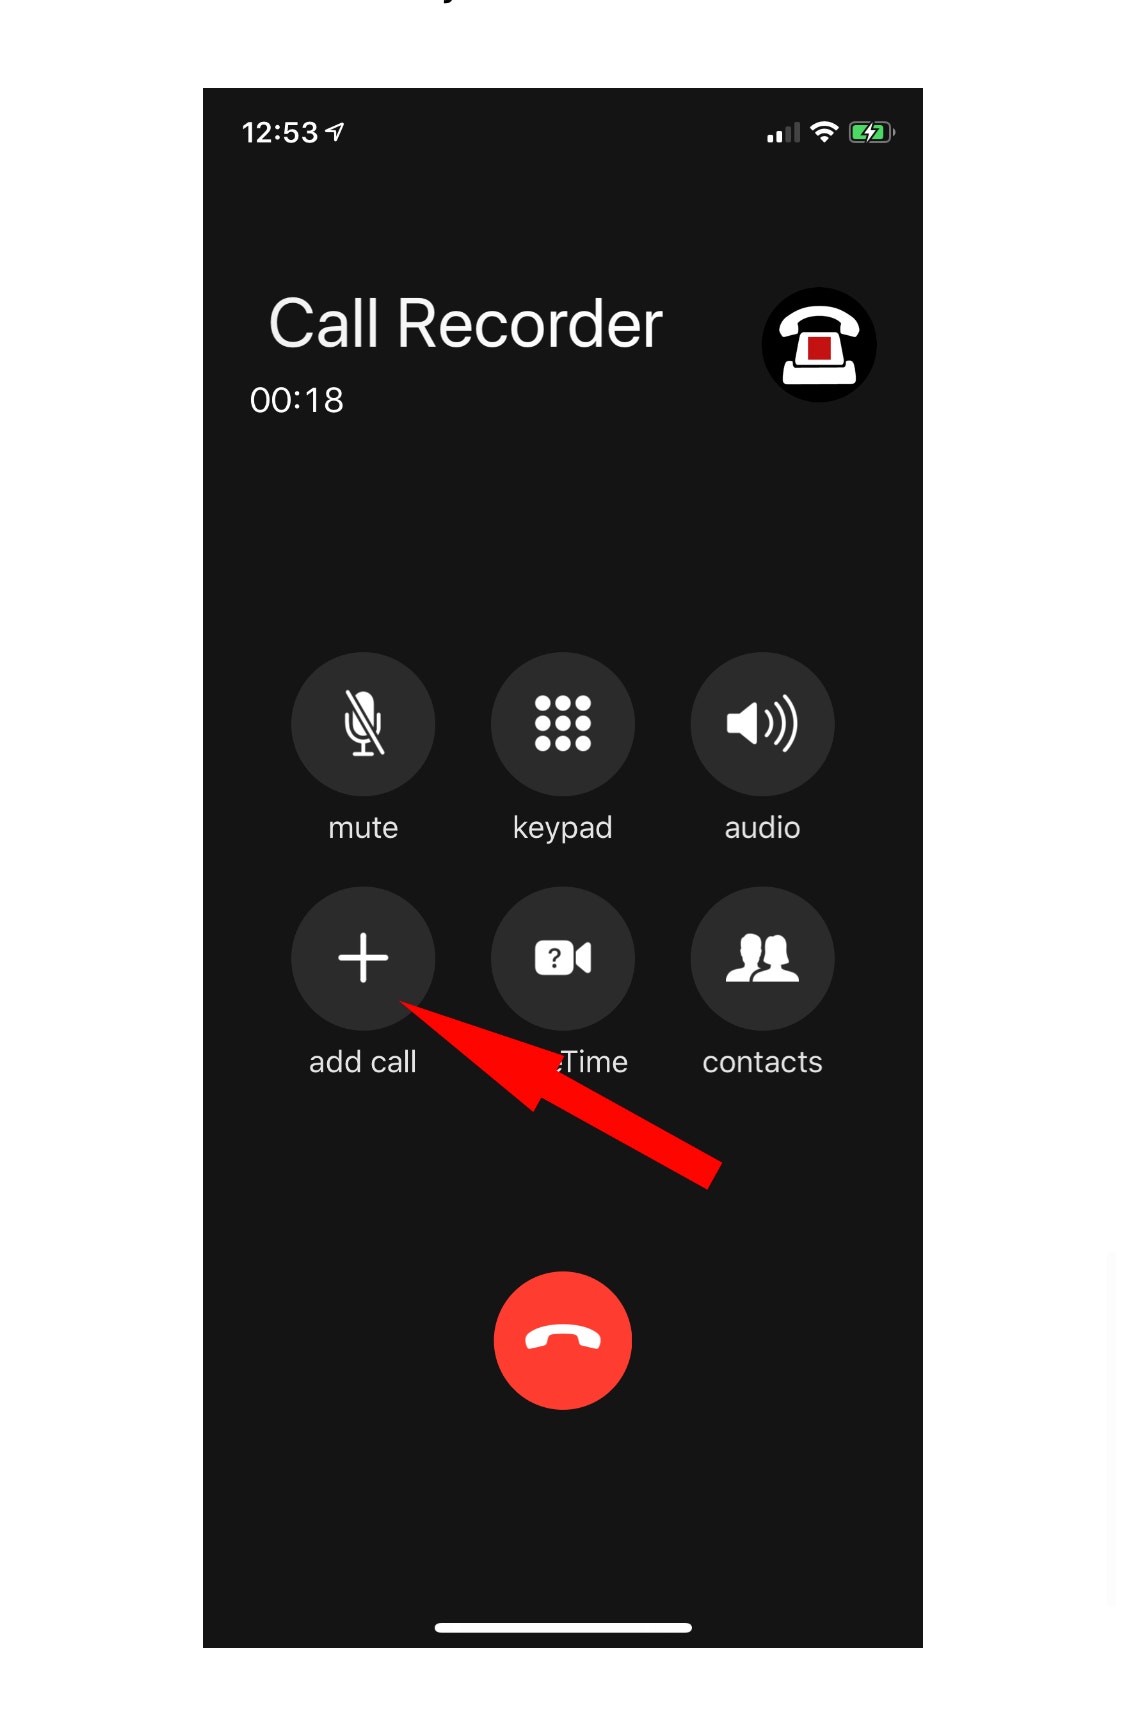 How to record calls on your phone